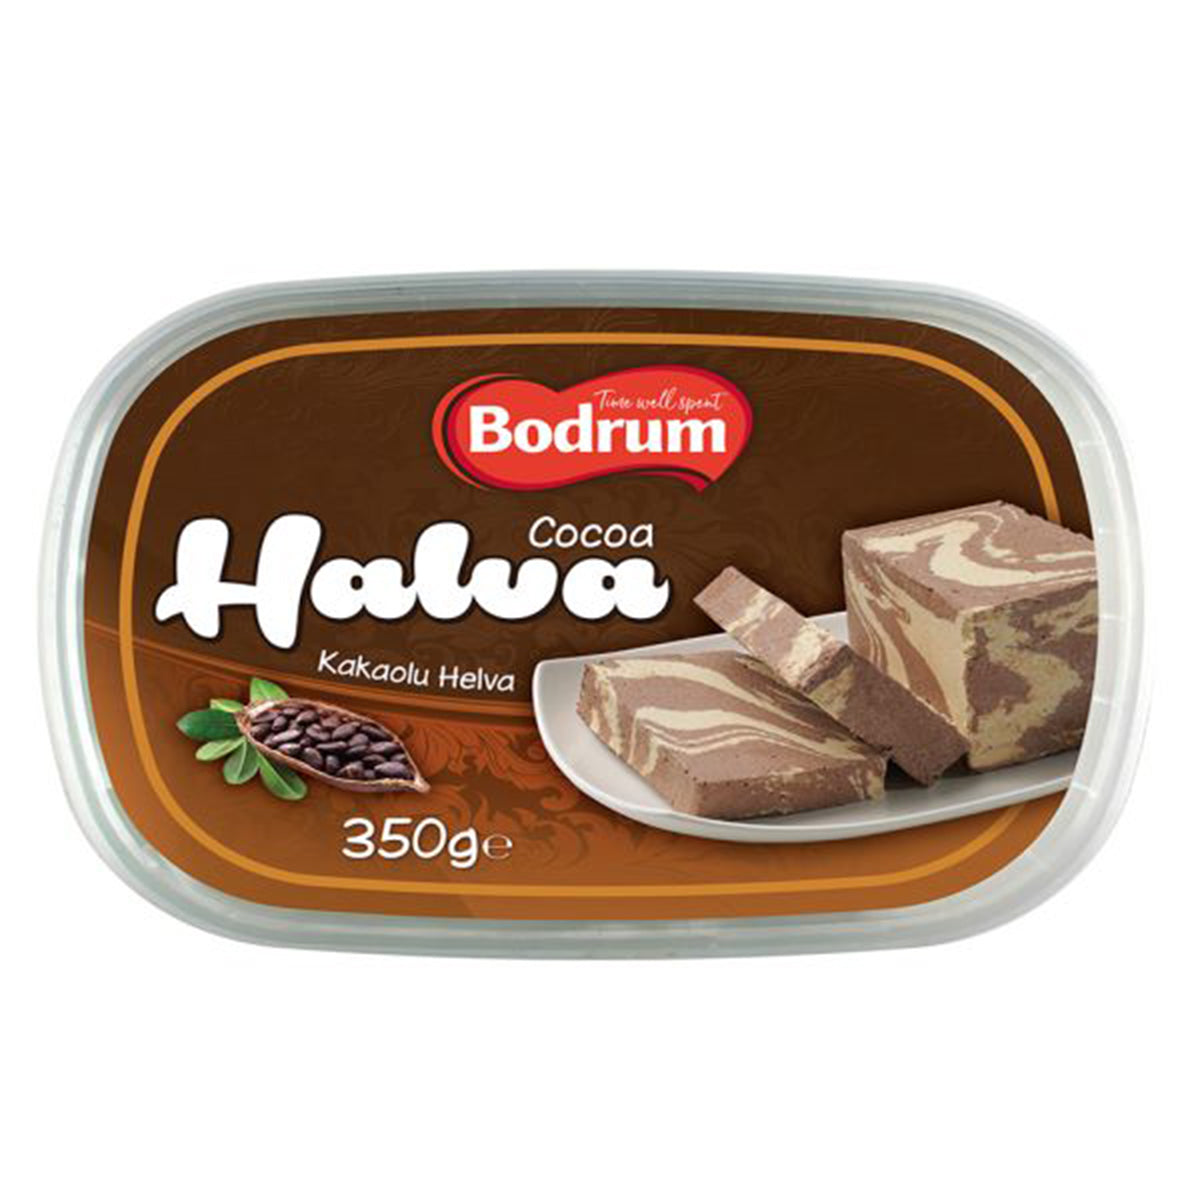 A tin of Bodrum - Tahini Halva with Cocoa - 350g on a white background.